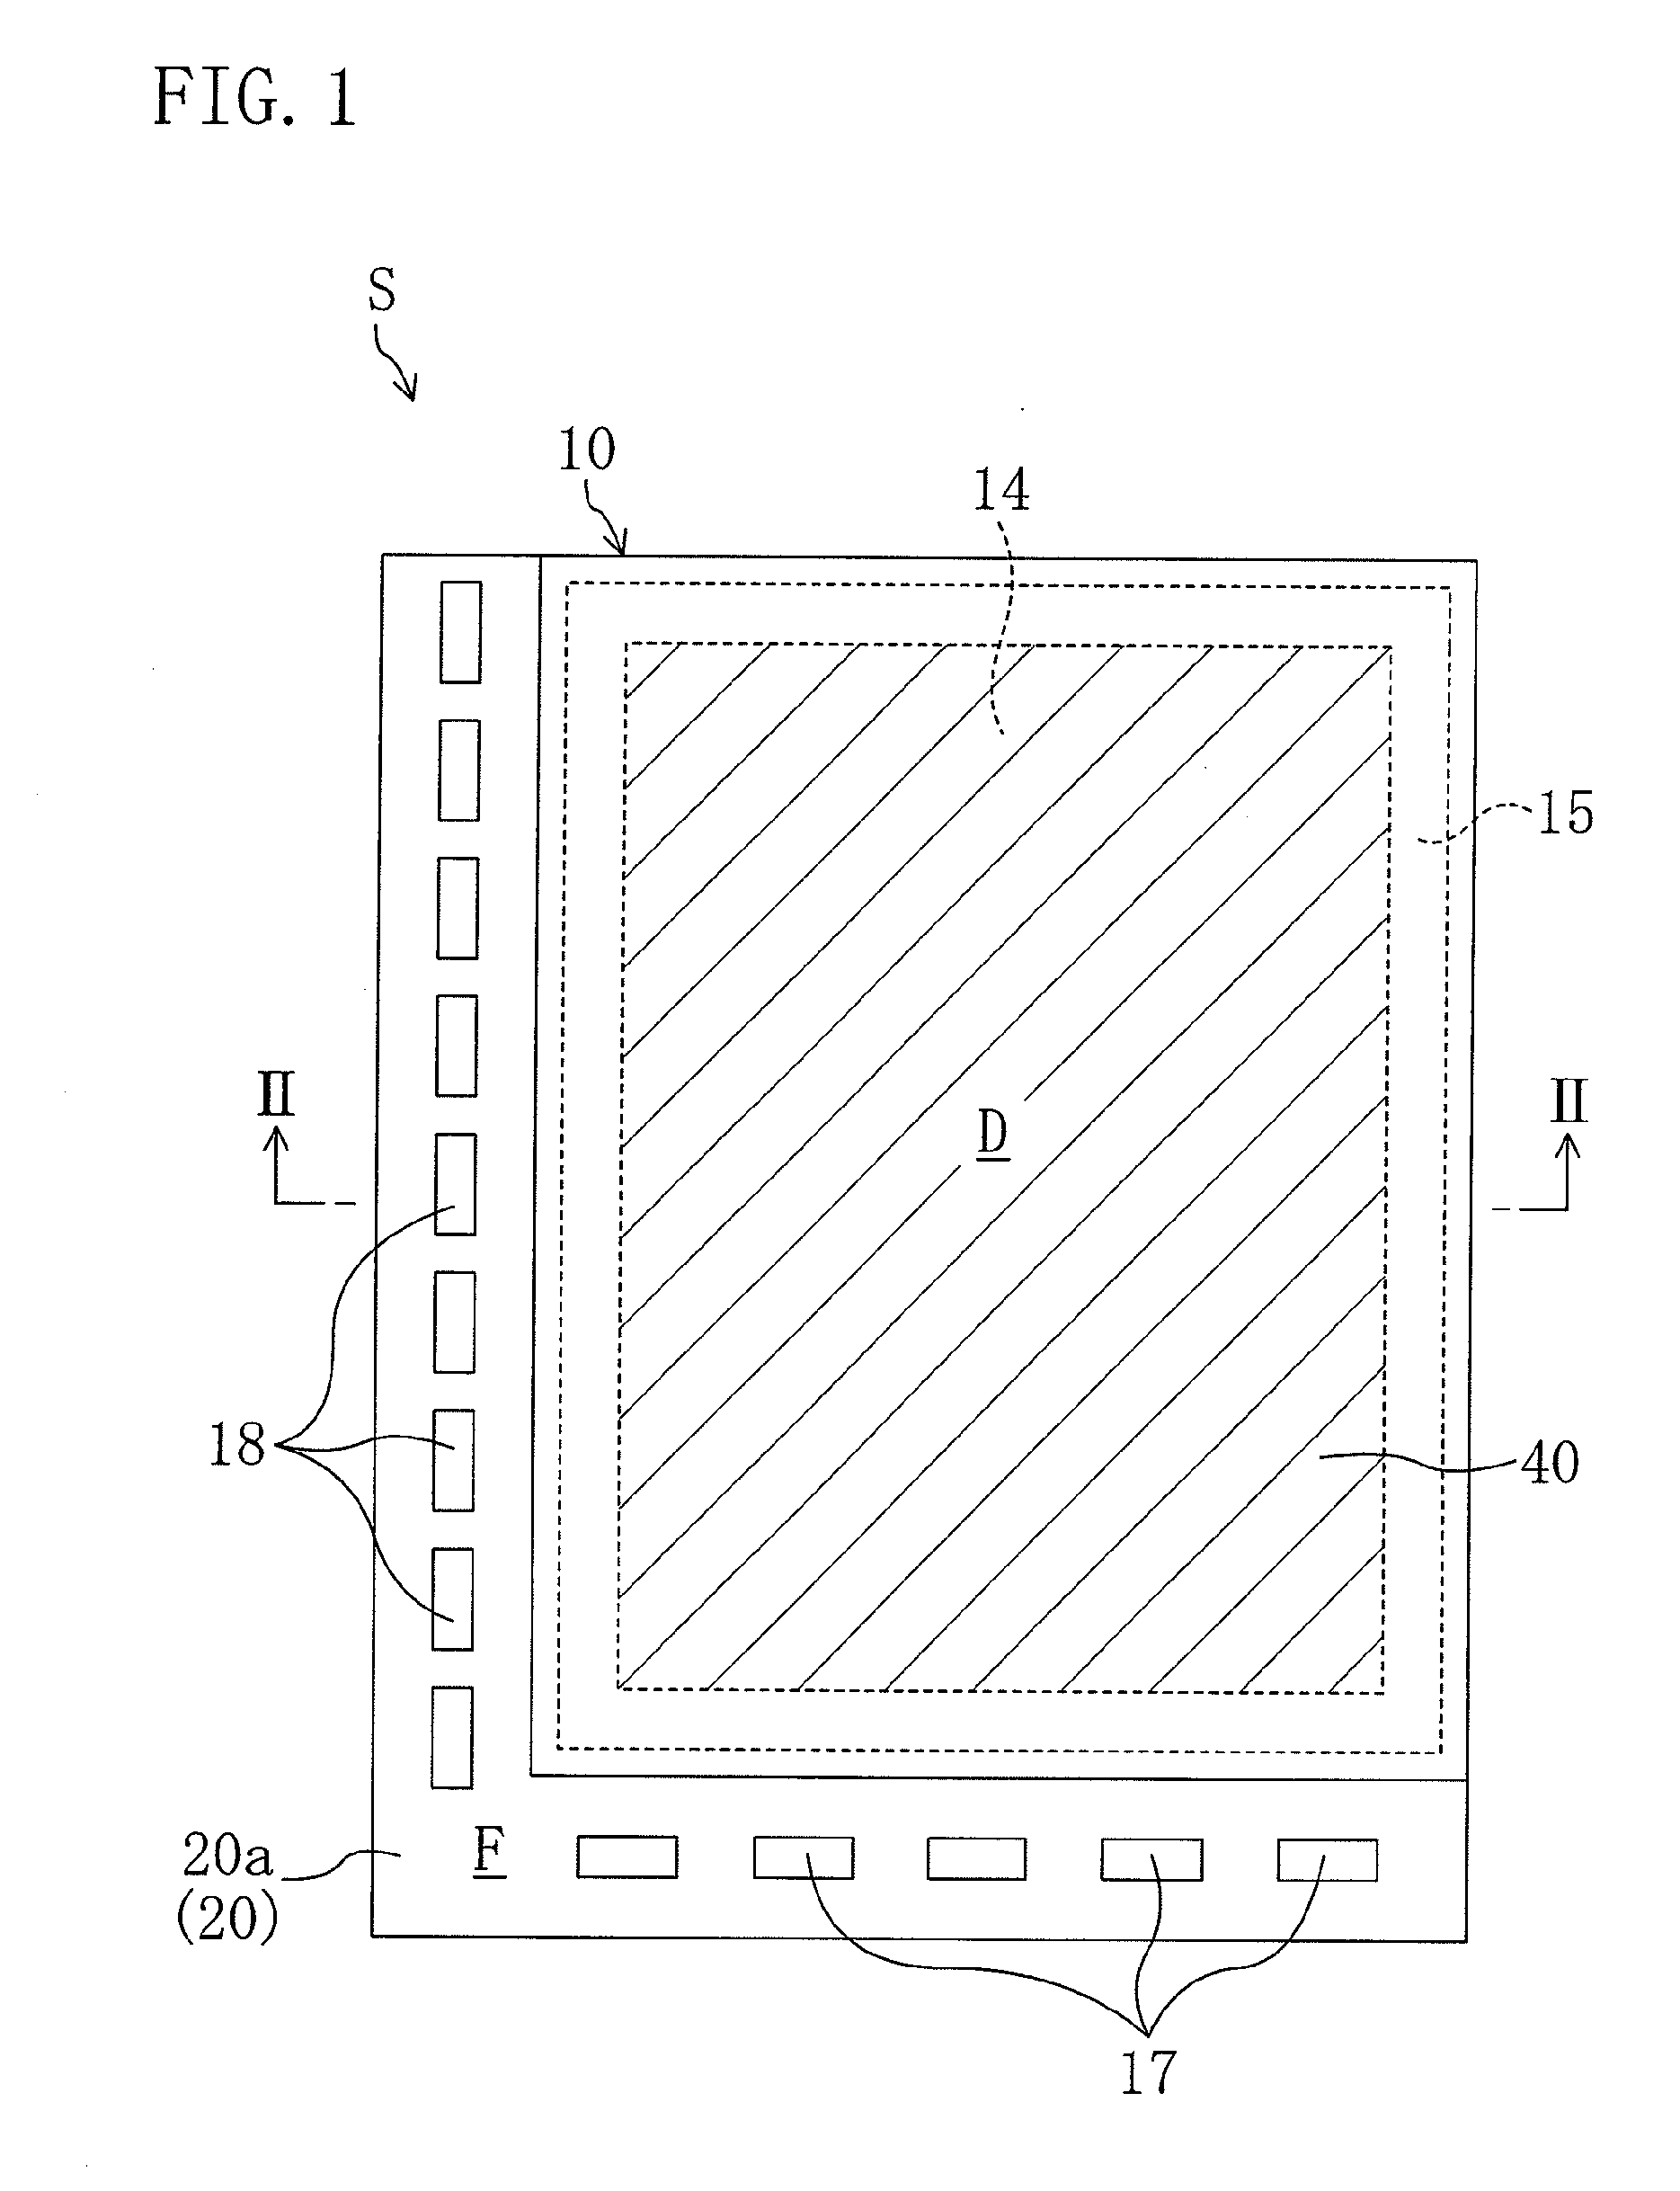 Active matrix substrate and liquid crystal display device